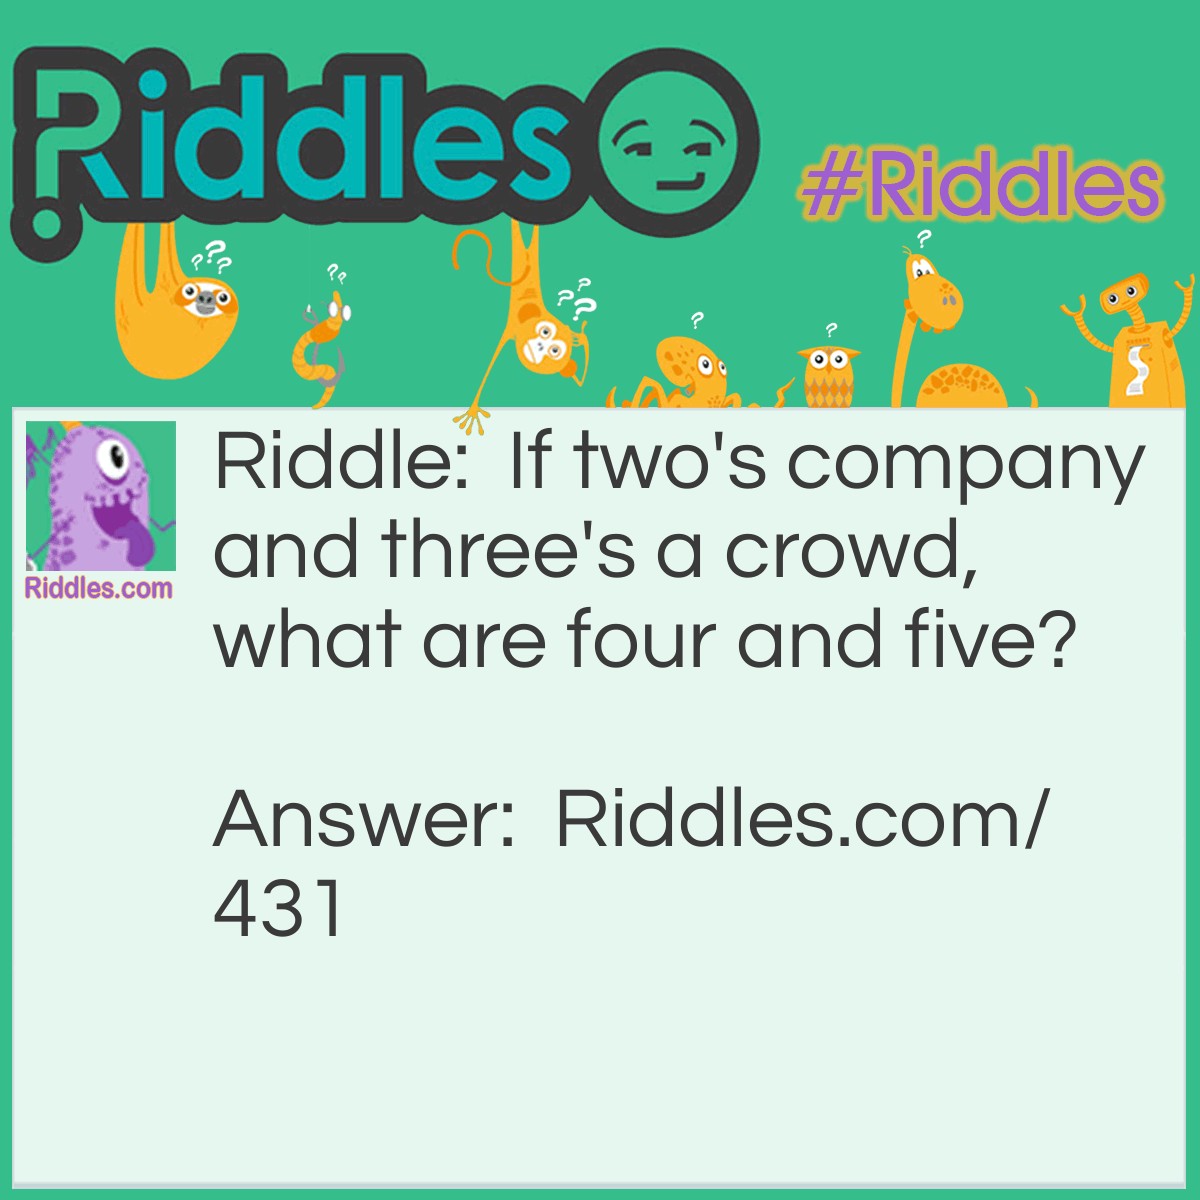 Riddle: If two's company and three's a crowd, what are four and five? Answer: Four and five is nine.